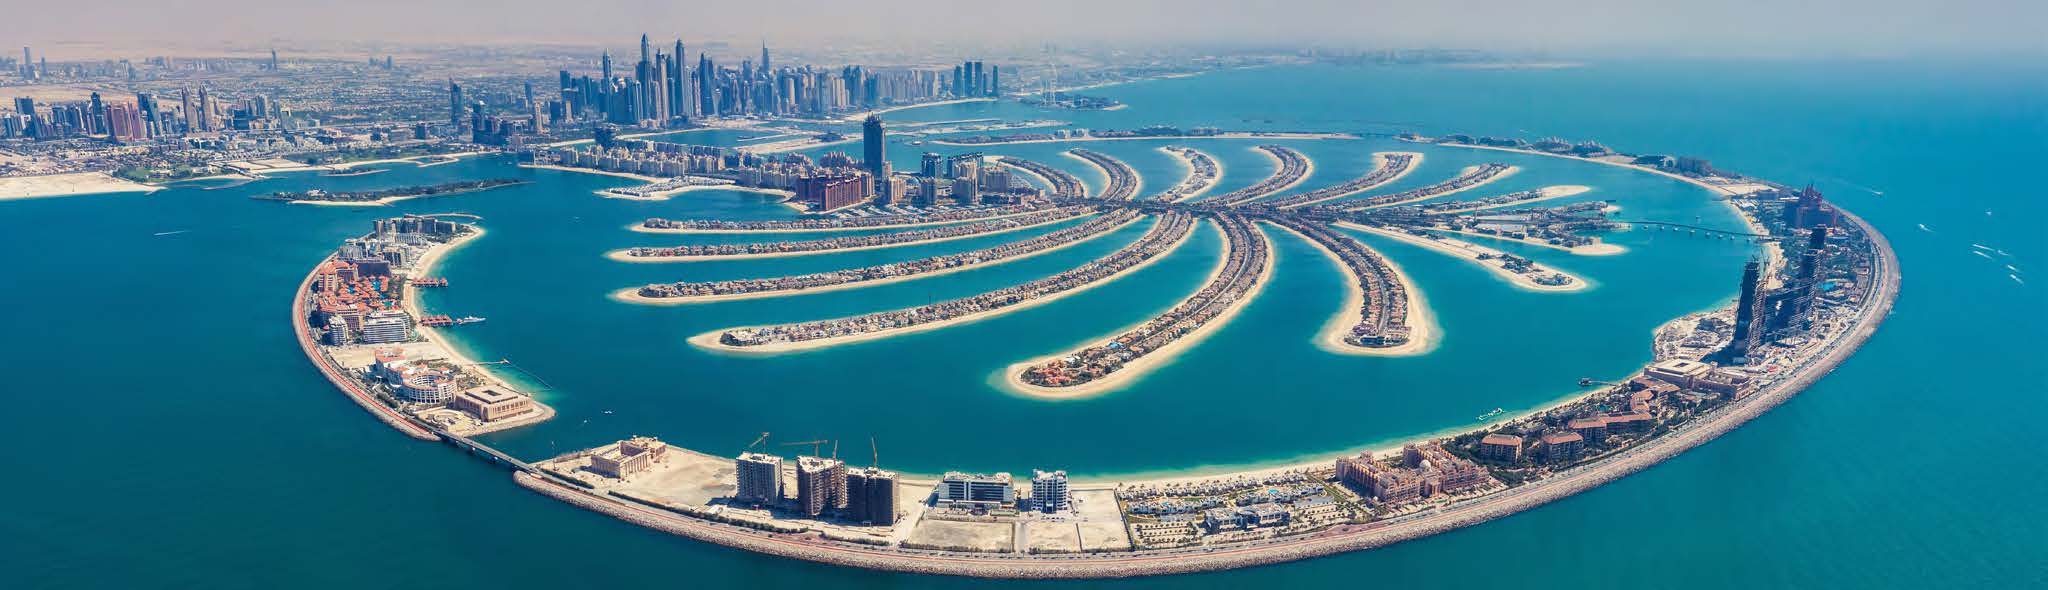 latest-project-in-dubai-armani-beach-residences-for-sale-in-palm-jumeirah